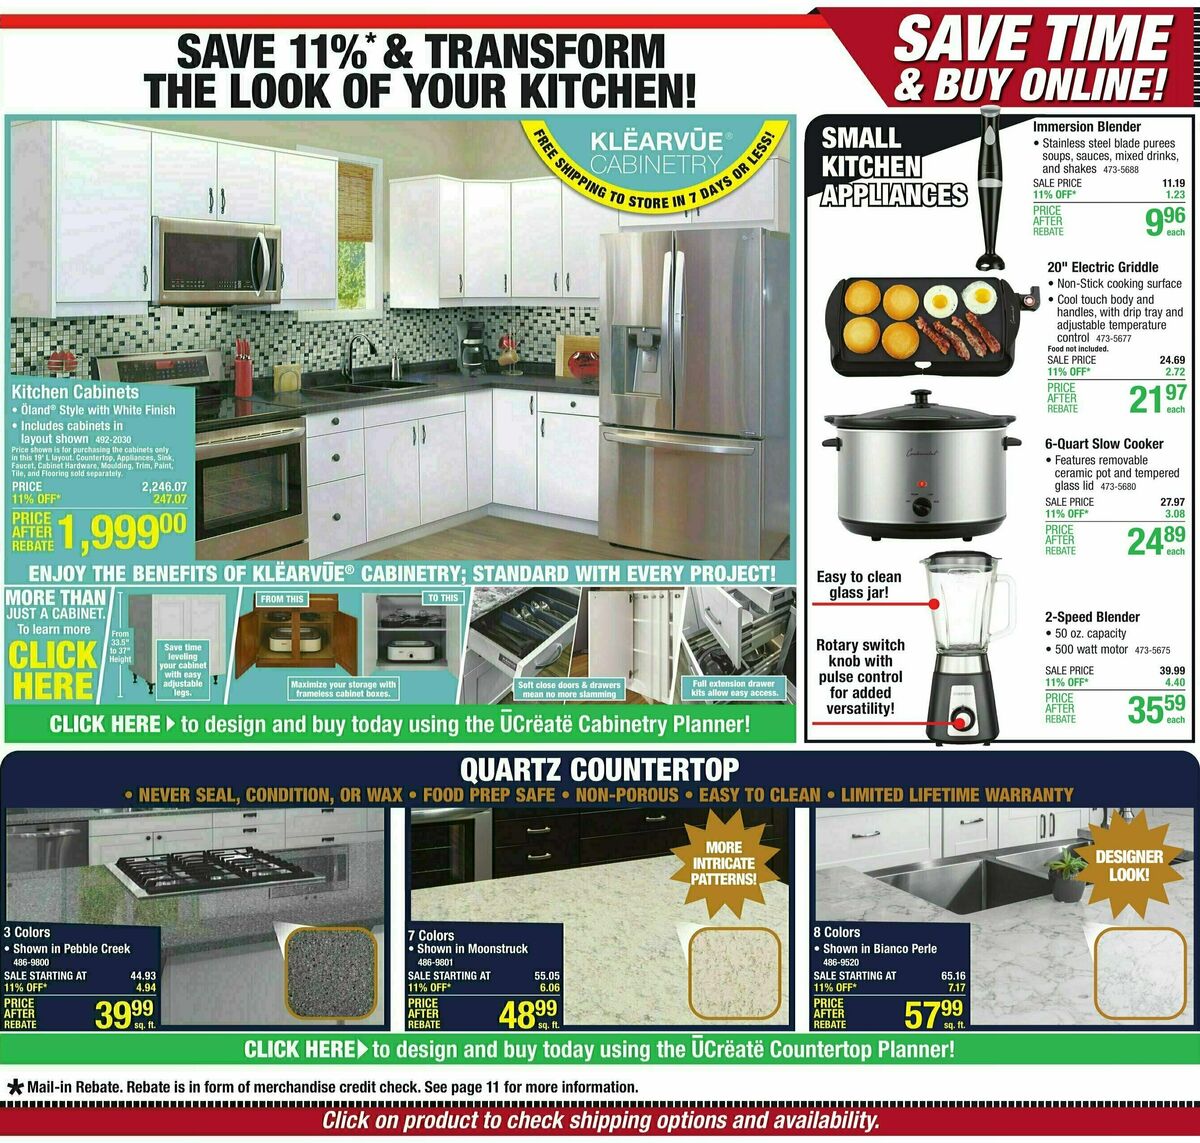 Menards Weekly Ad from June 29